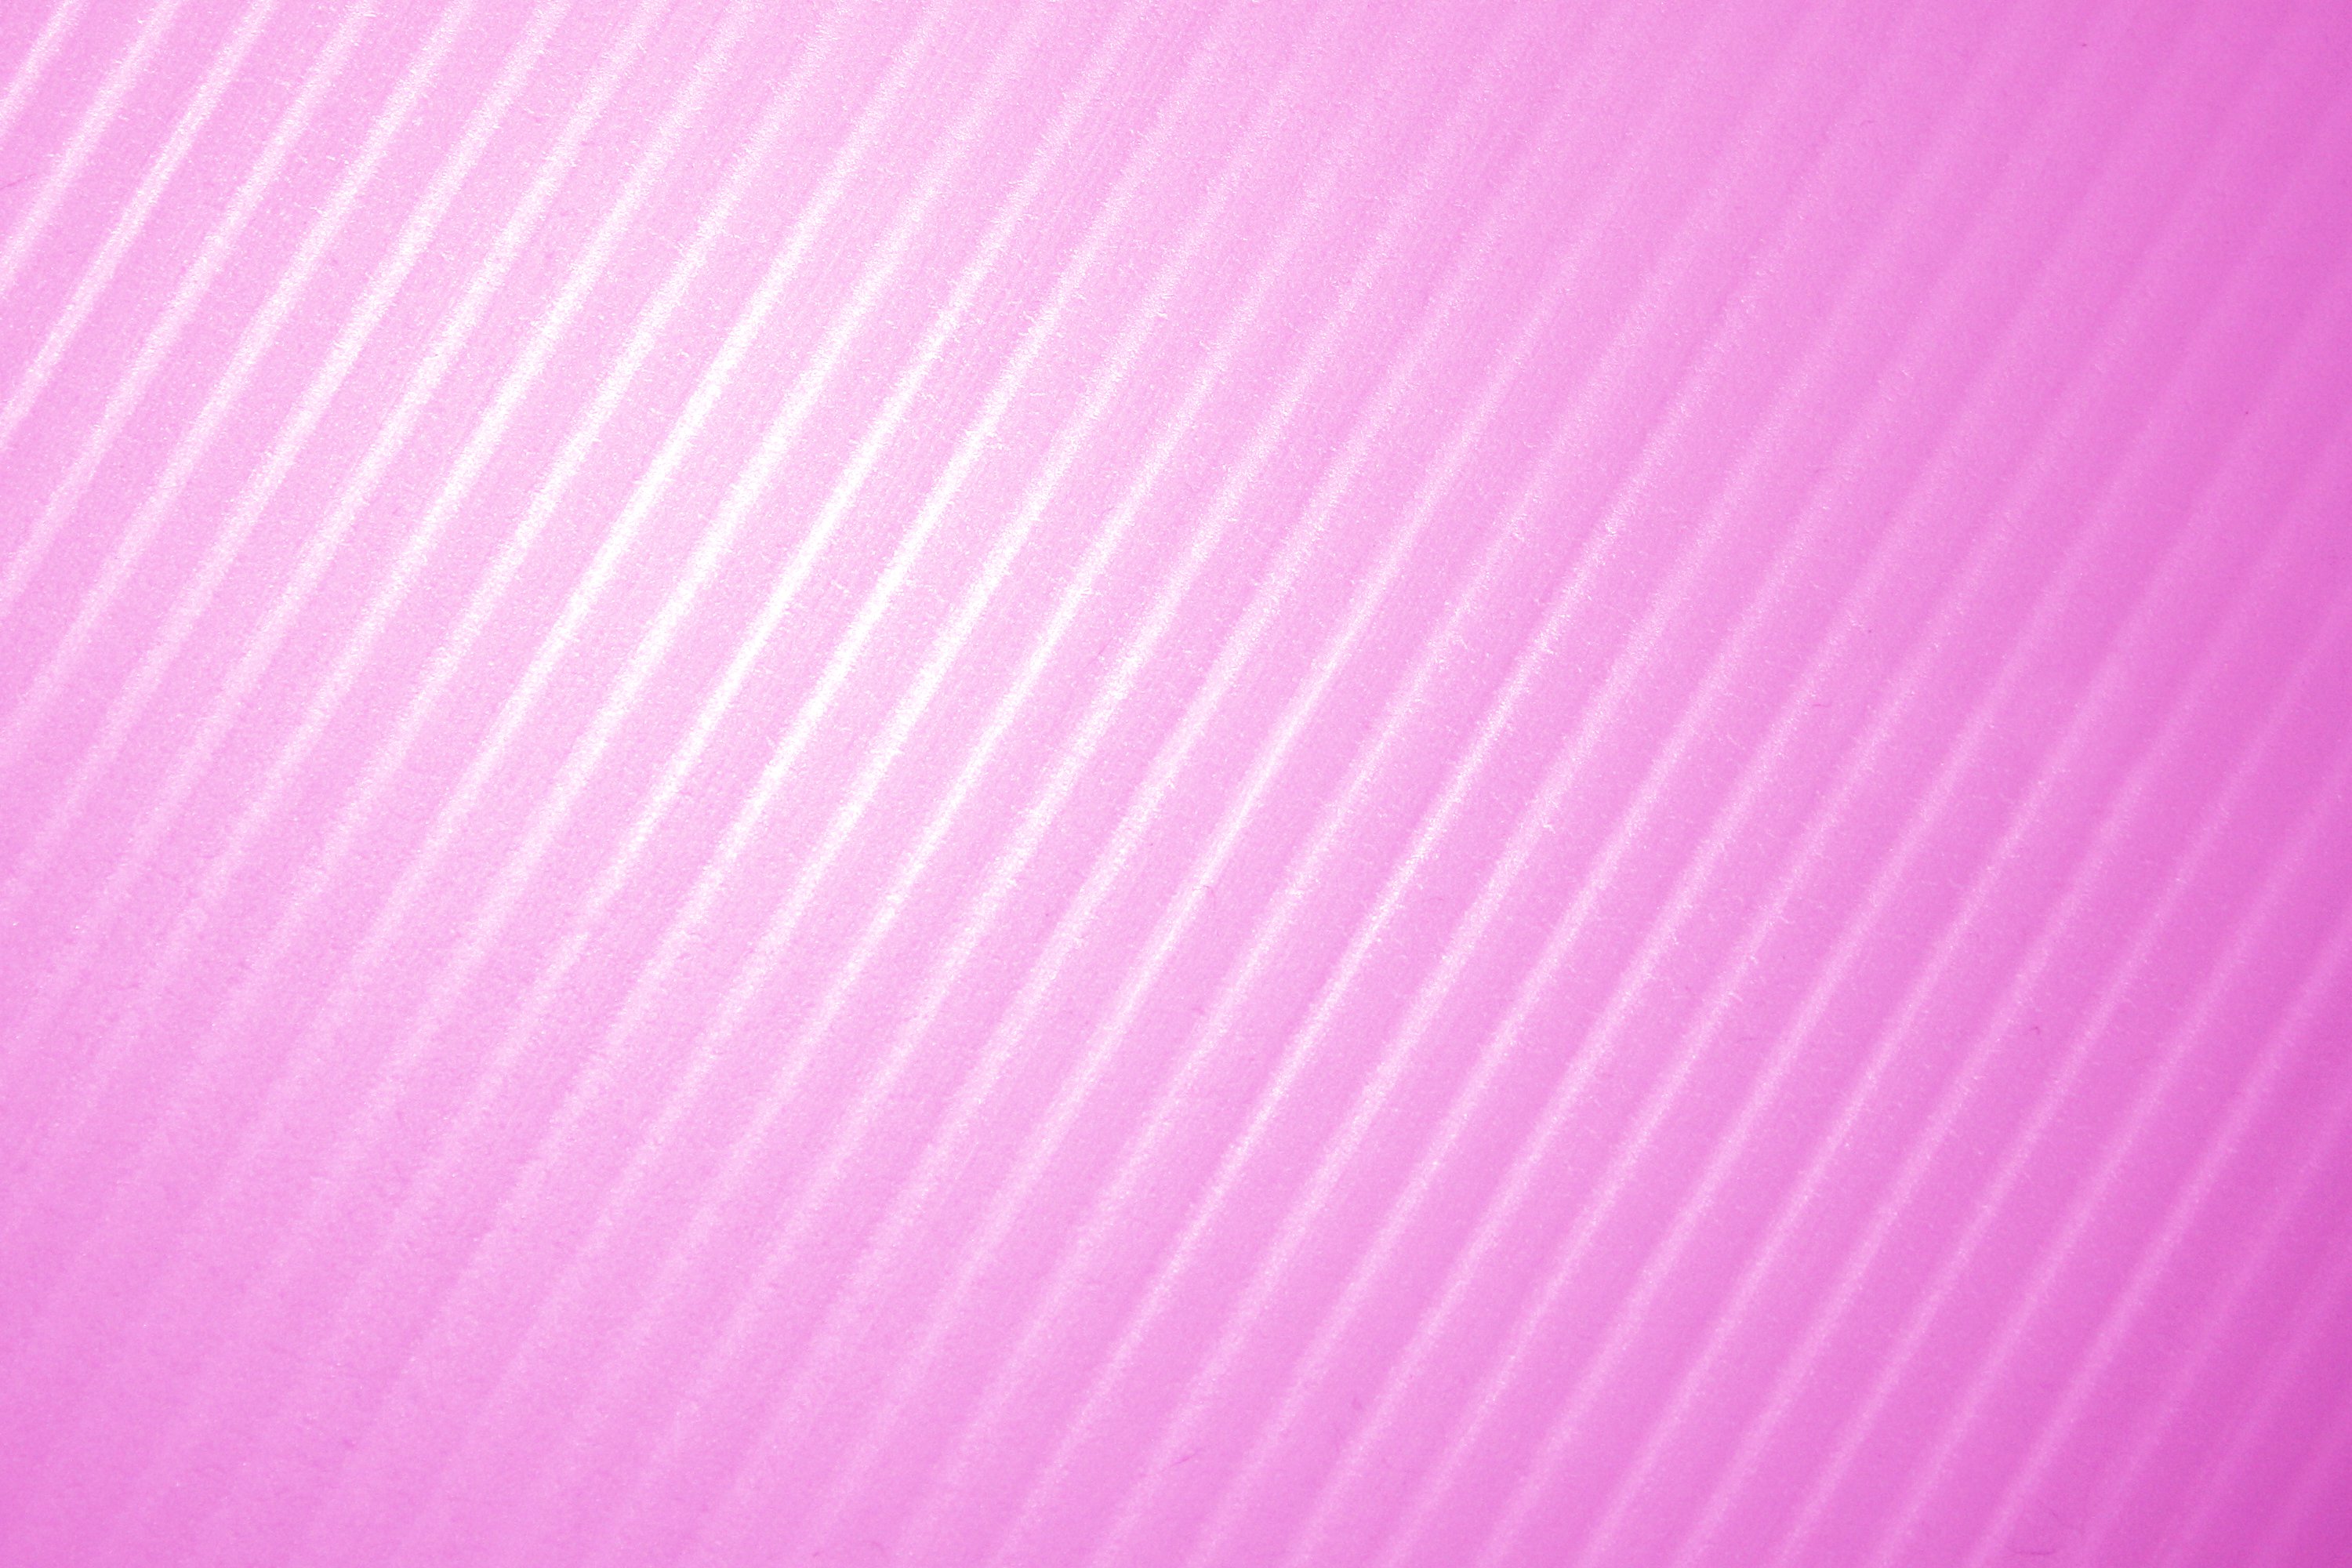 Pink Diagonal Striped Plastic Texture Picture | Free Photograph ...